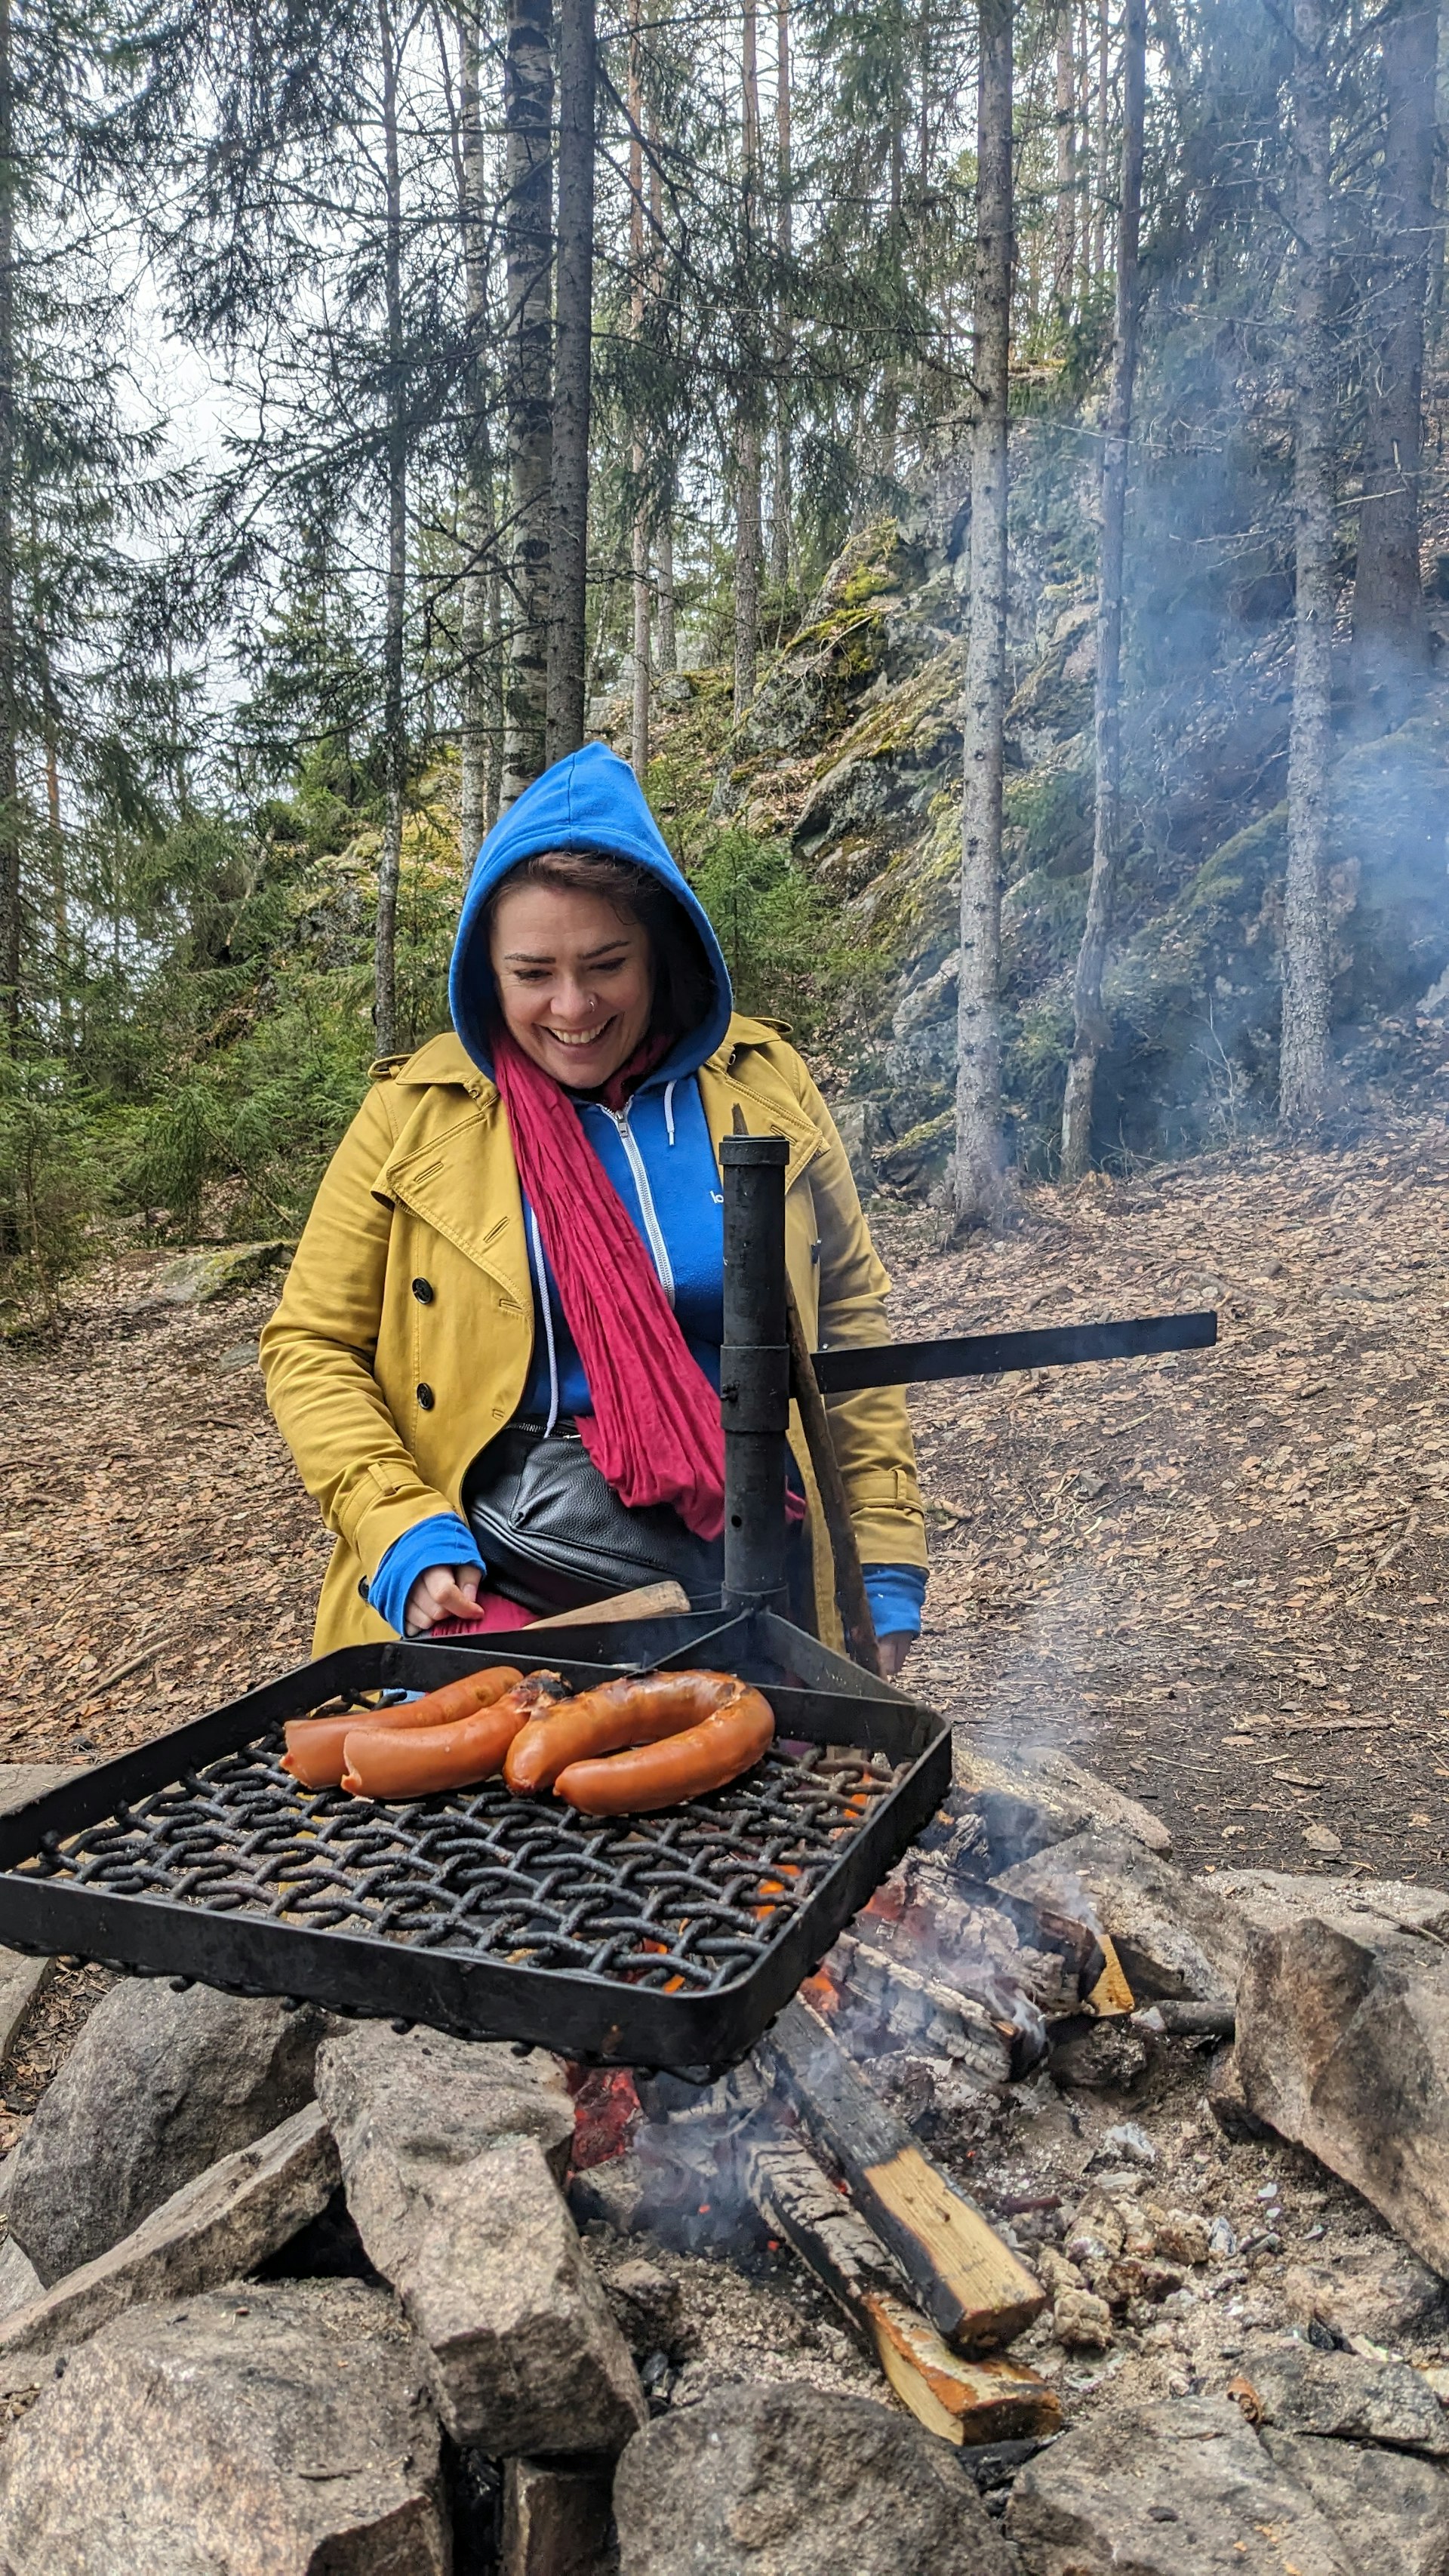 A woman sits near a campfire in woodland watching sausages cook on the grill